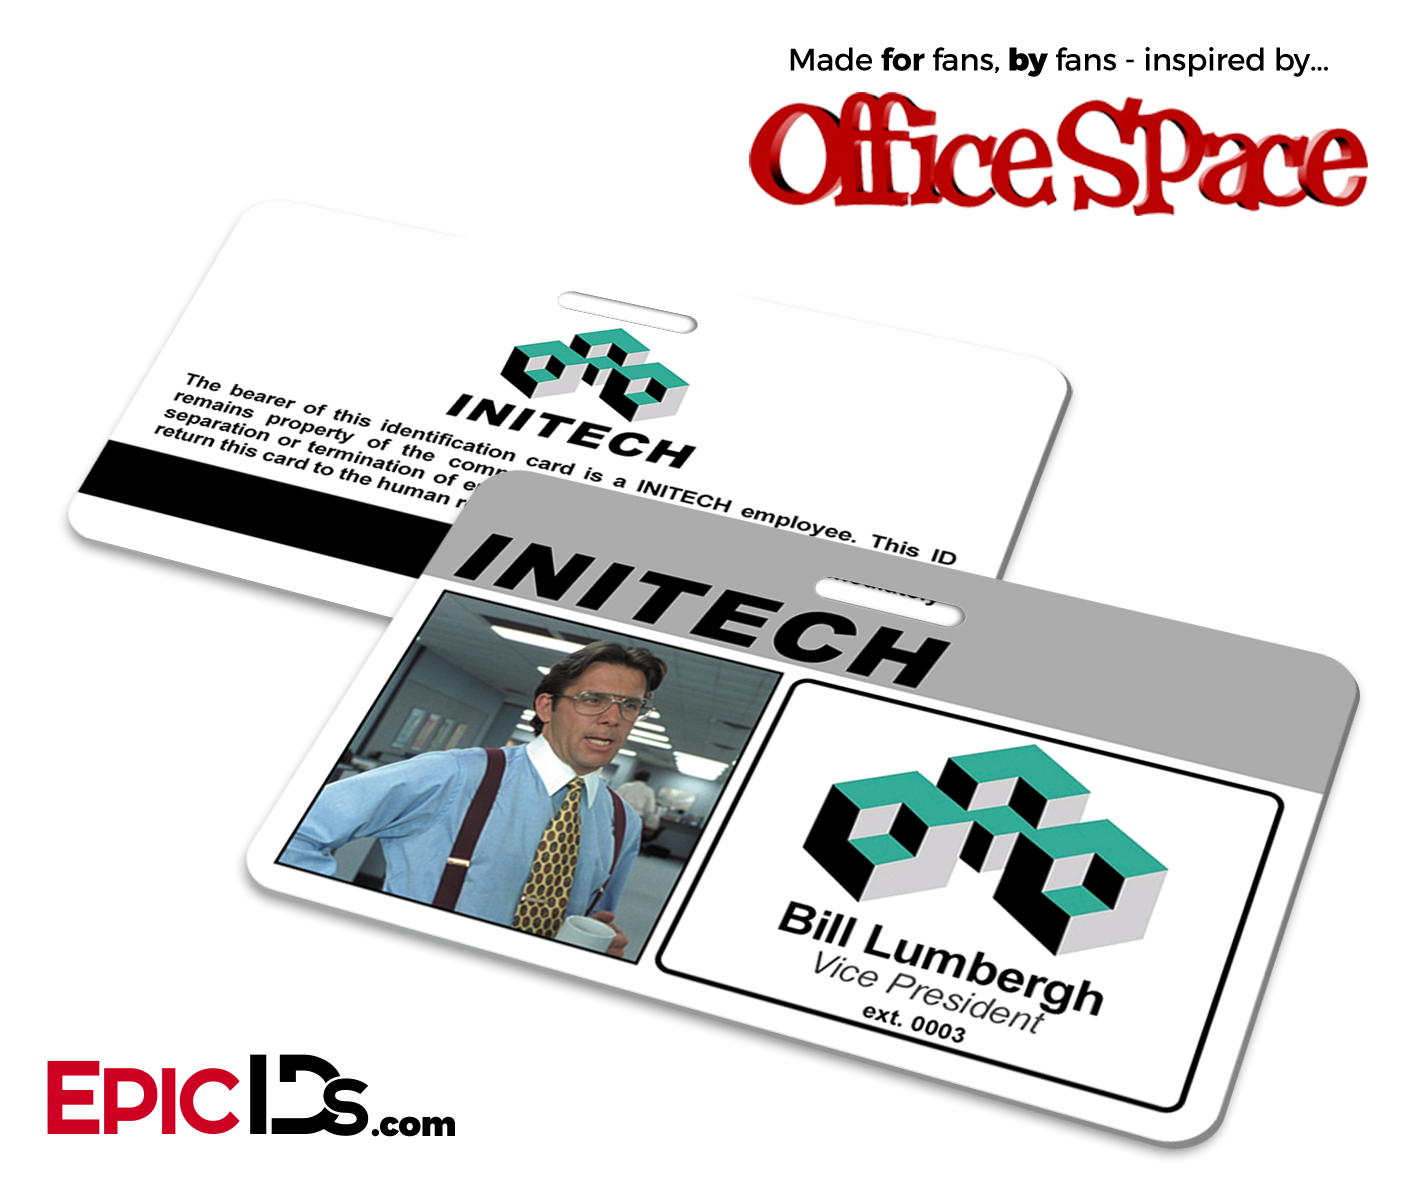 Office Space Inspired Initech Employee ID / Name Badge - Bill Lumbergh -  Epic IDs